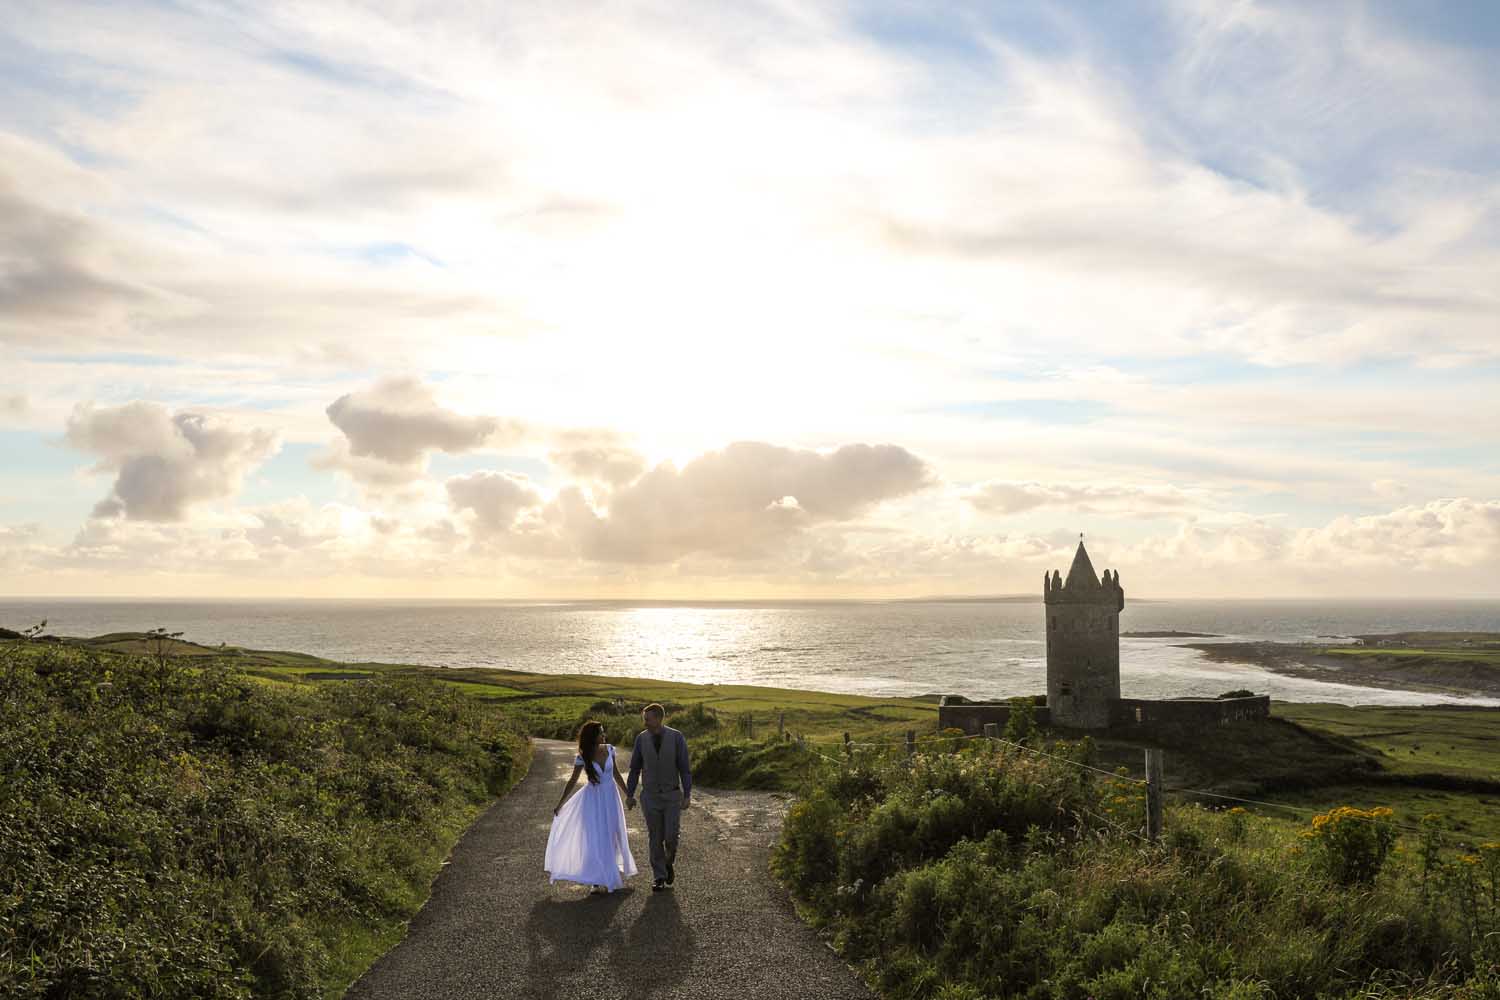 Married couple walking by Doonagore Castle, Co. Clare, Ireland